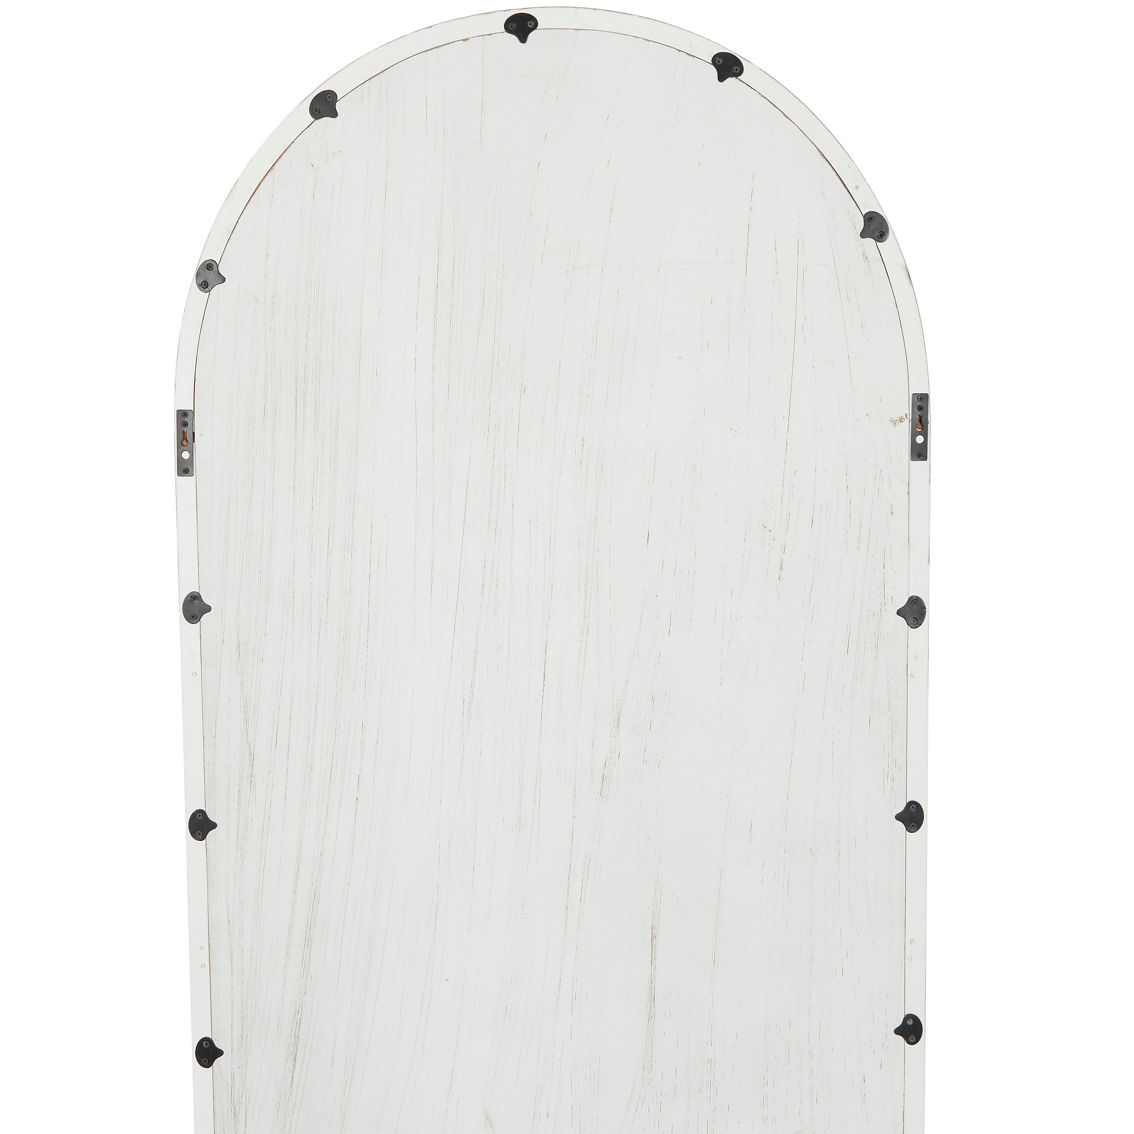 Morgan Hill Home Traditional White Wood Wall Mirror - Image 3 of 5